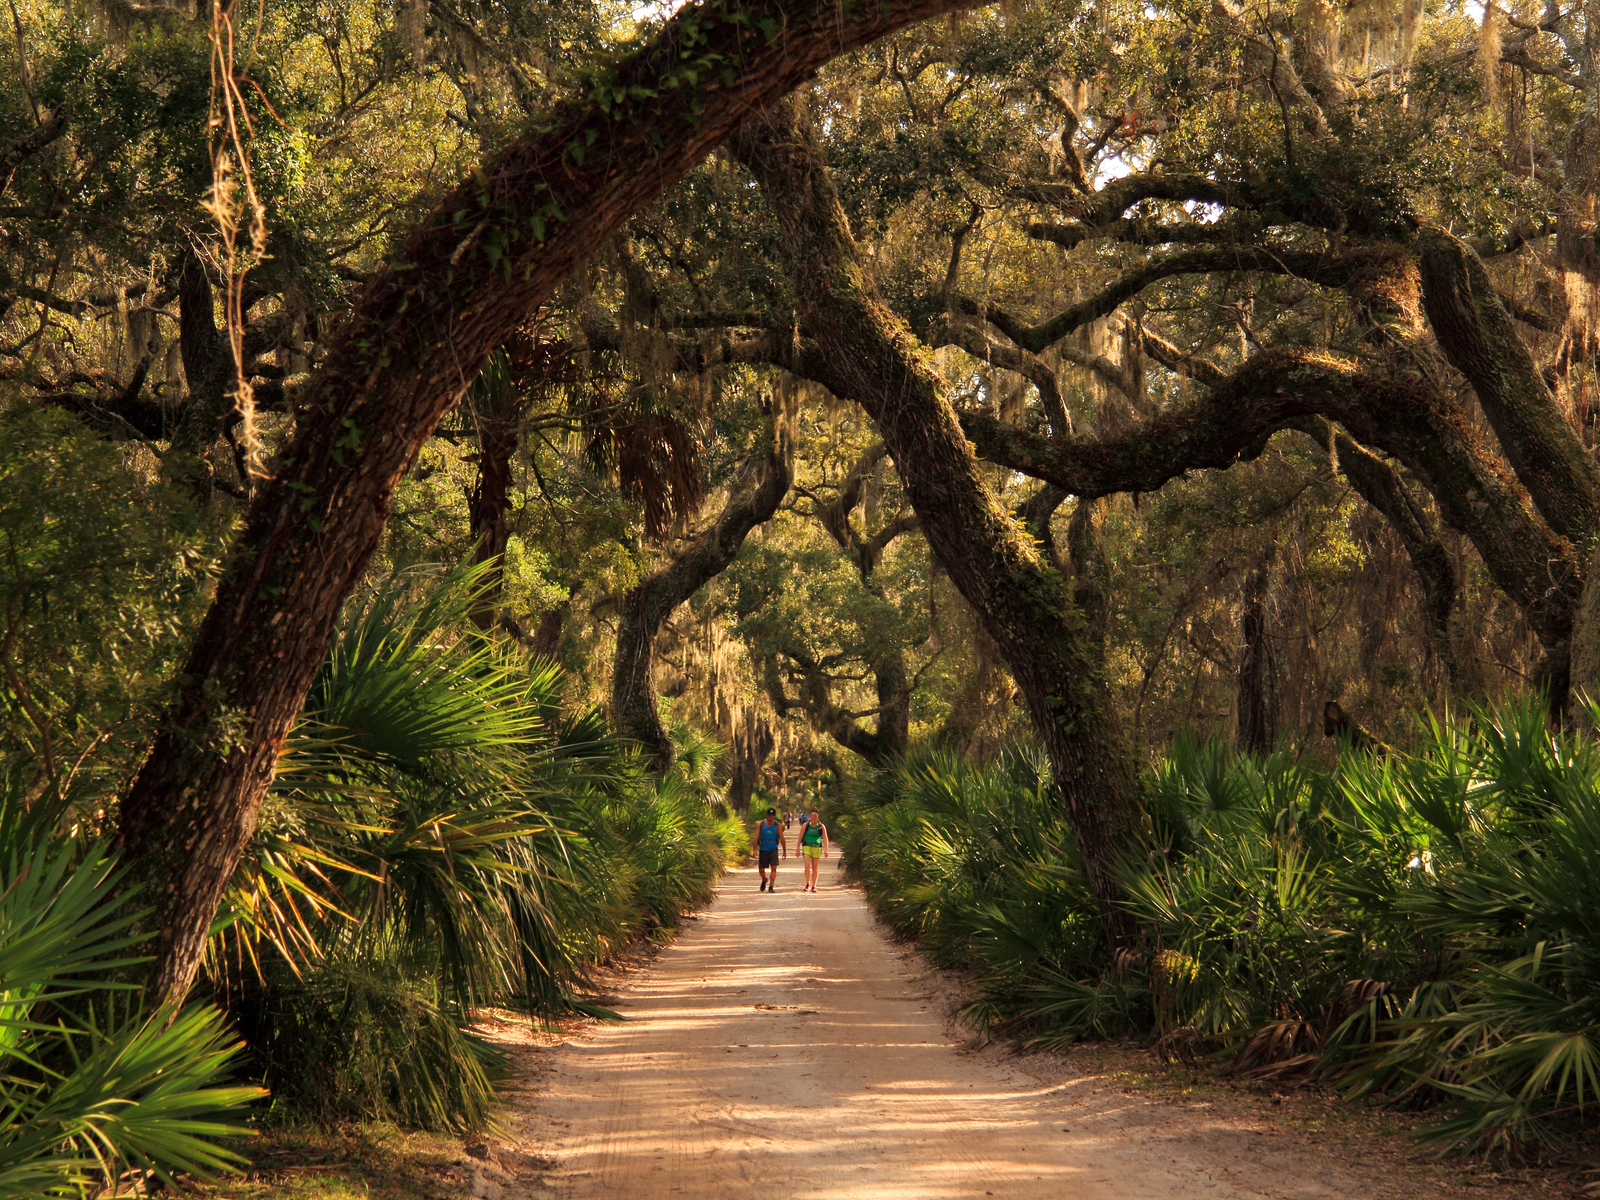 Visitors trekking one of the best tourist attractions in Georgia, Cumberland Island's dreamy path over thick unpruned tree branches